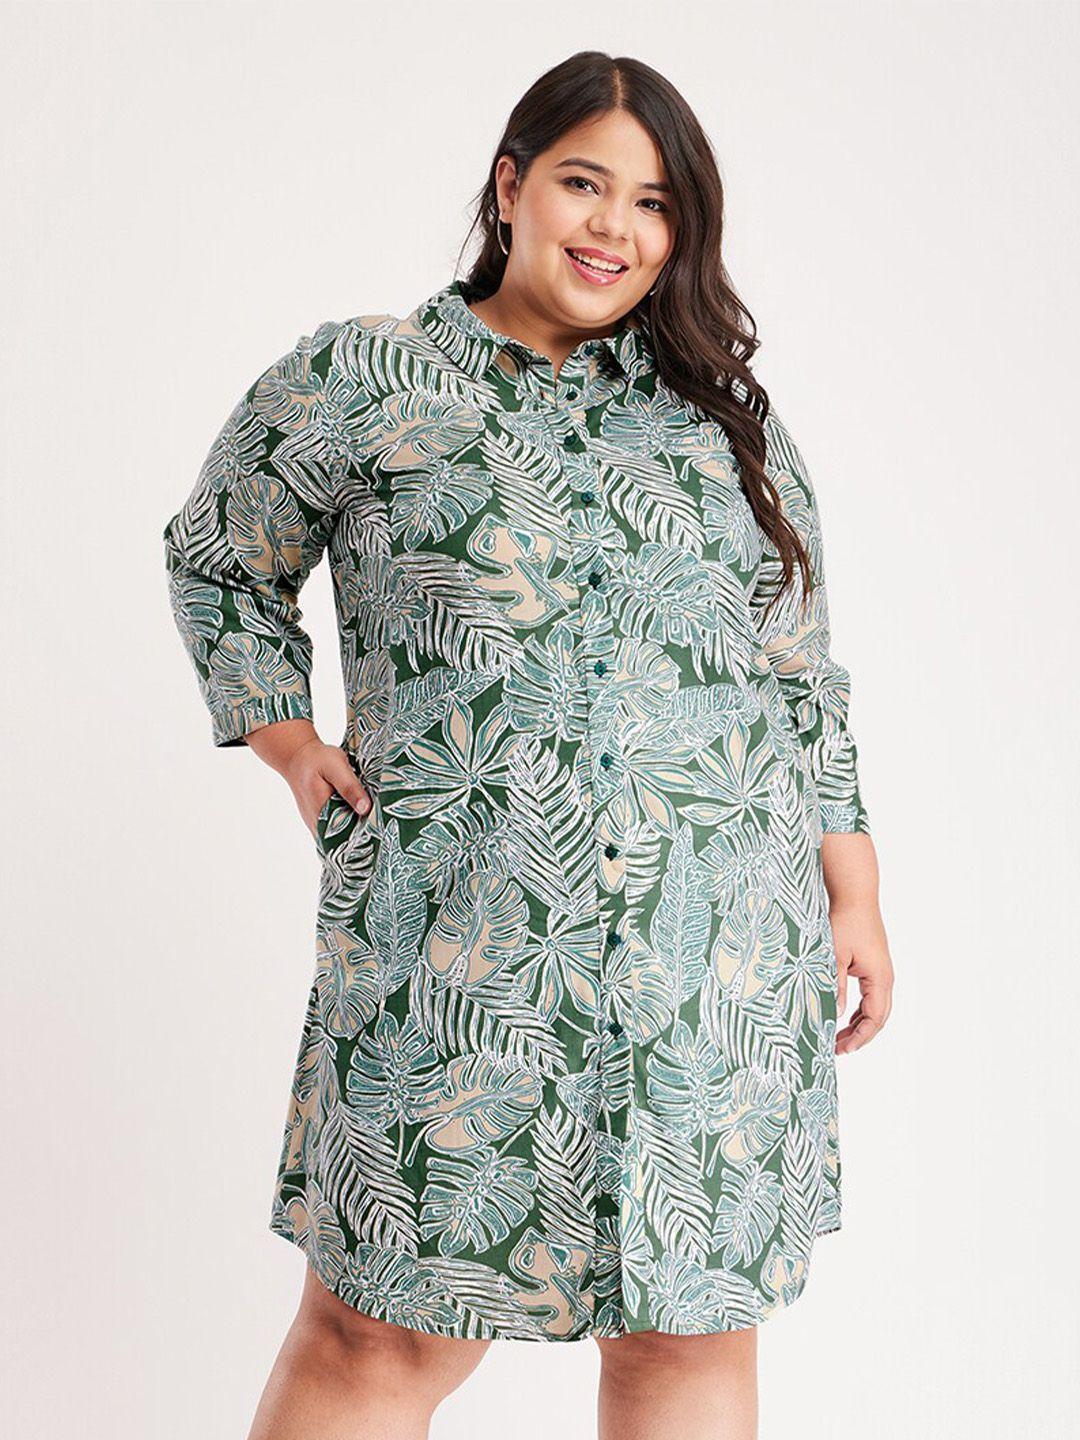 fablestreet x plus size floral printed shirt dress